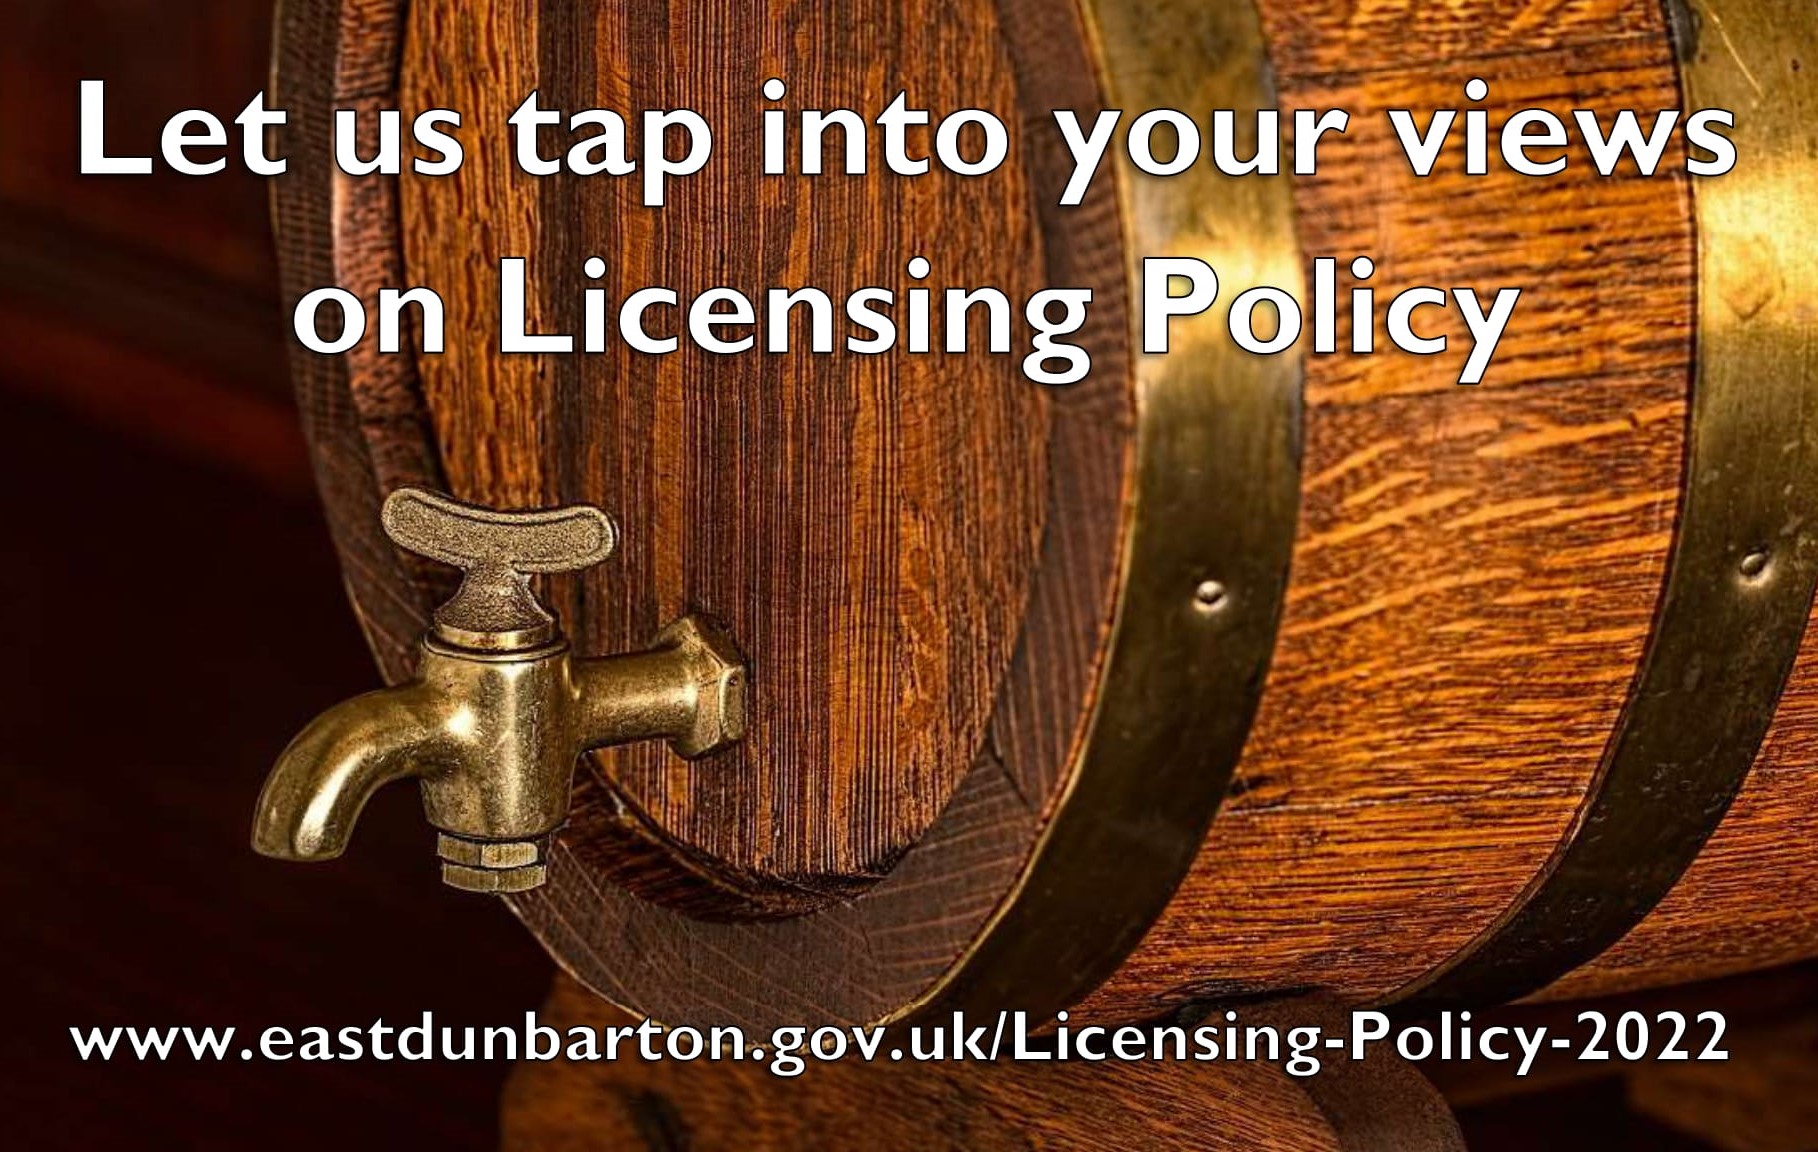 wooden barrel with a tap and text that reads "let us tap into your views on licensing policy"